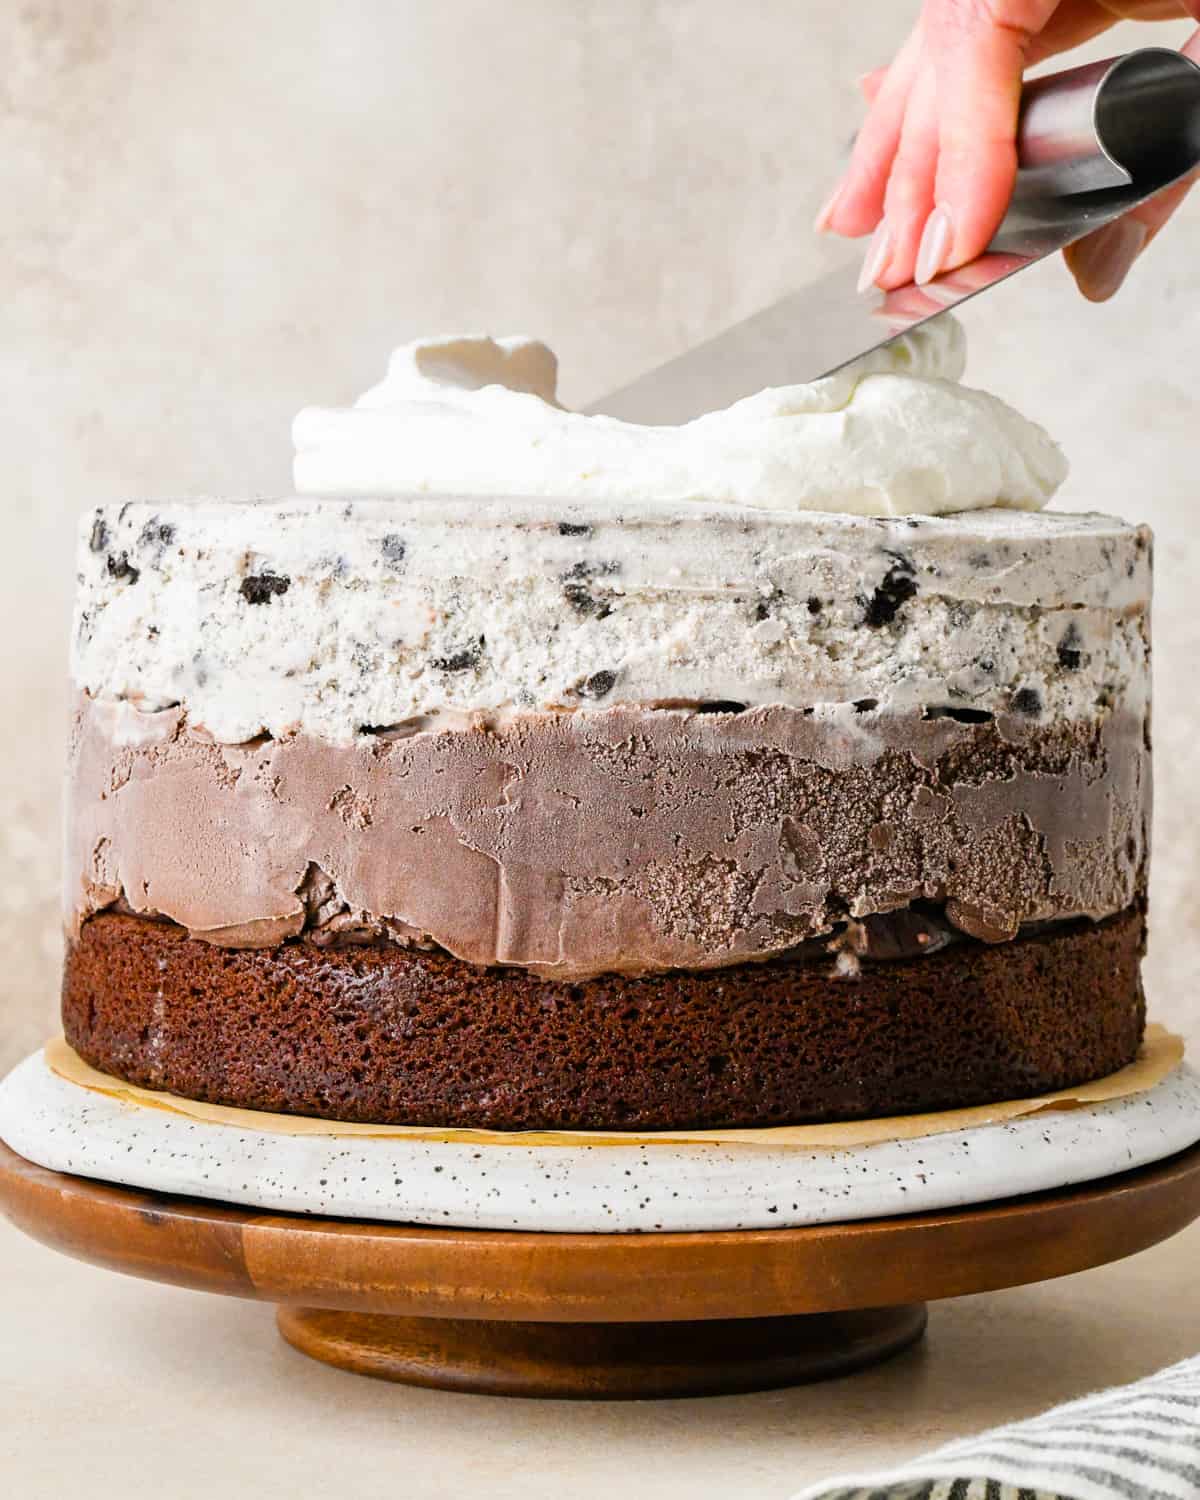 whipped cream being spread over an ice cream cake as frosting